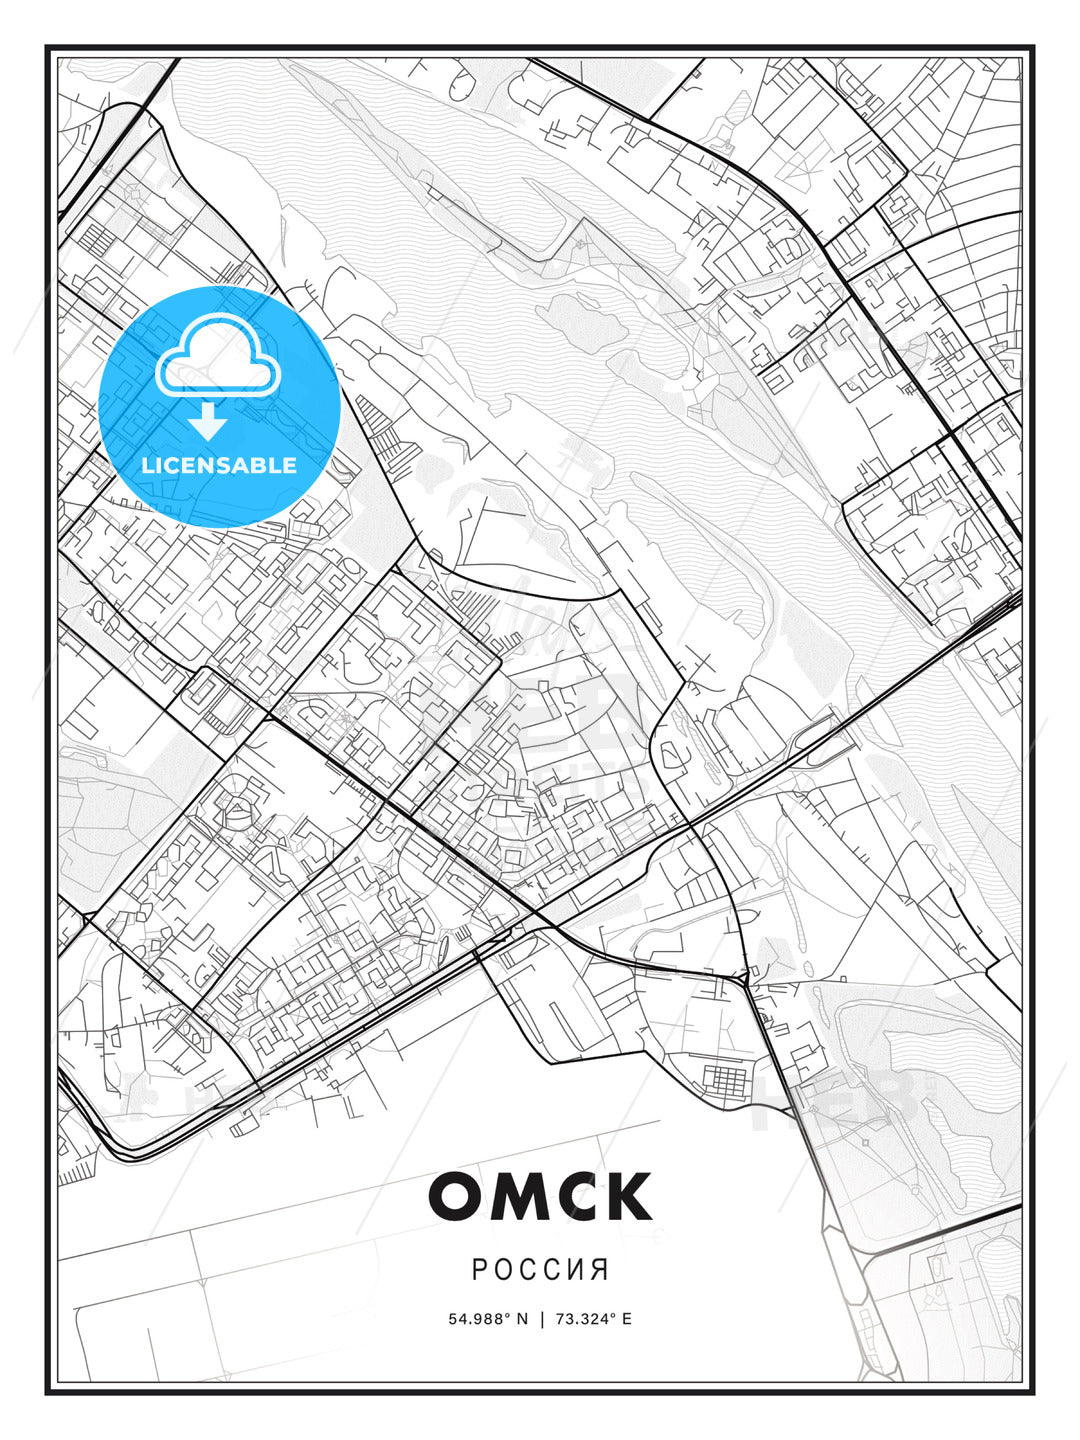 ОМСК / Omsk, Russia, Modern Print Template in Various Formats - HEBSTREITS Sketches